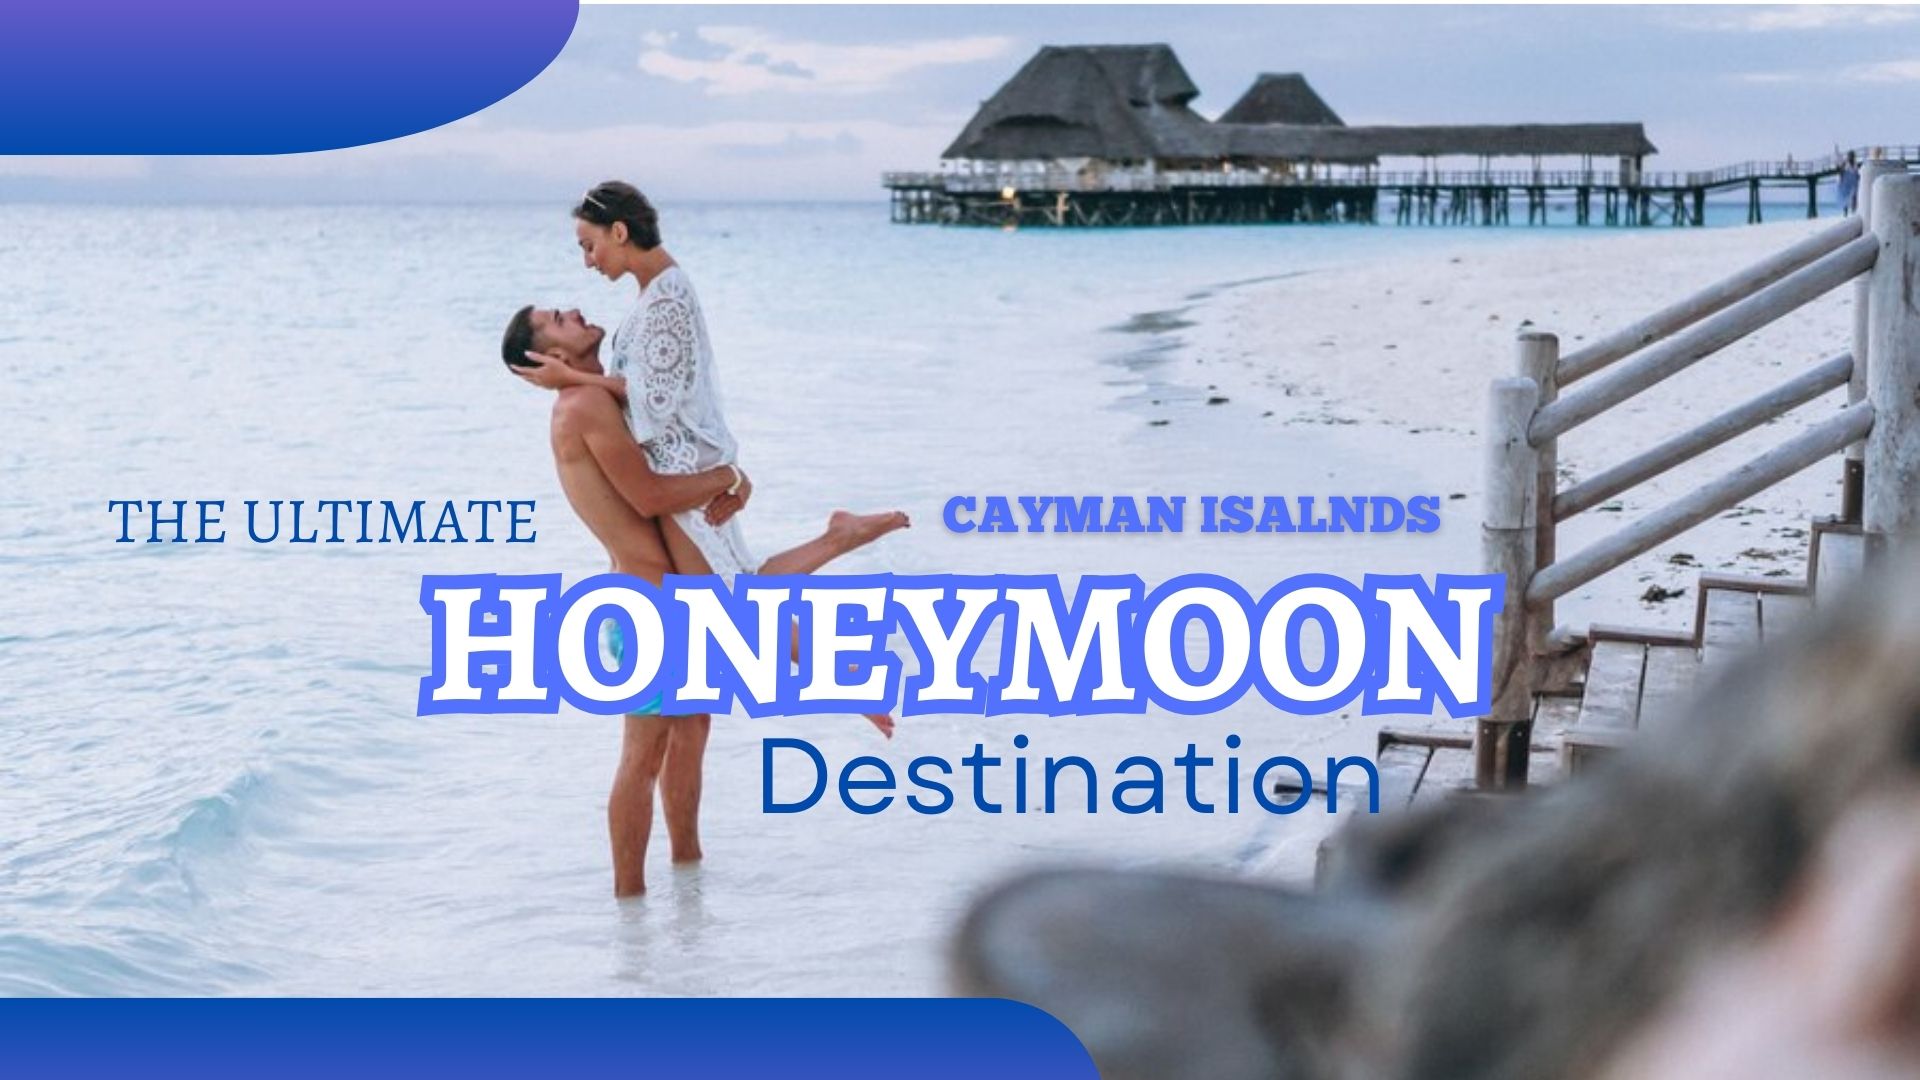 Why The Cayman Islands Are The Ultimate Honeymoon Destination